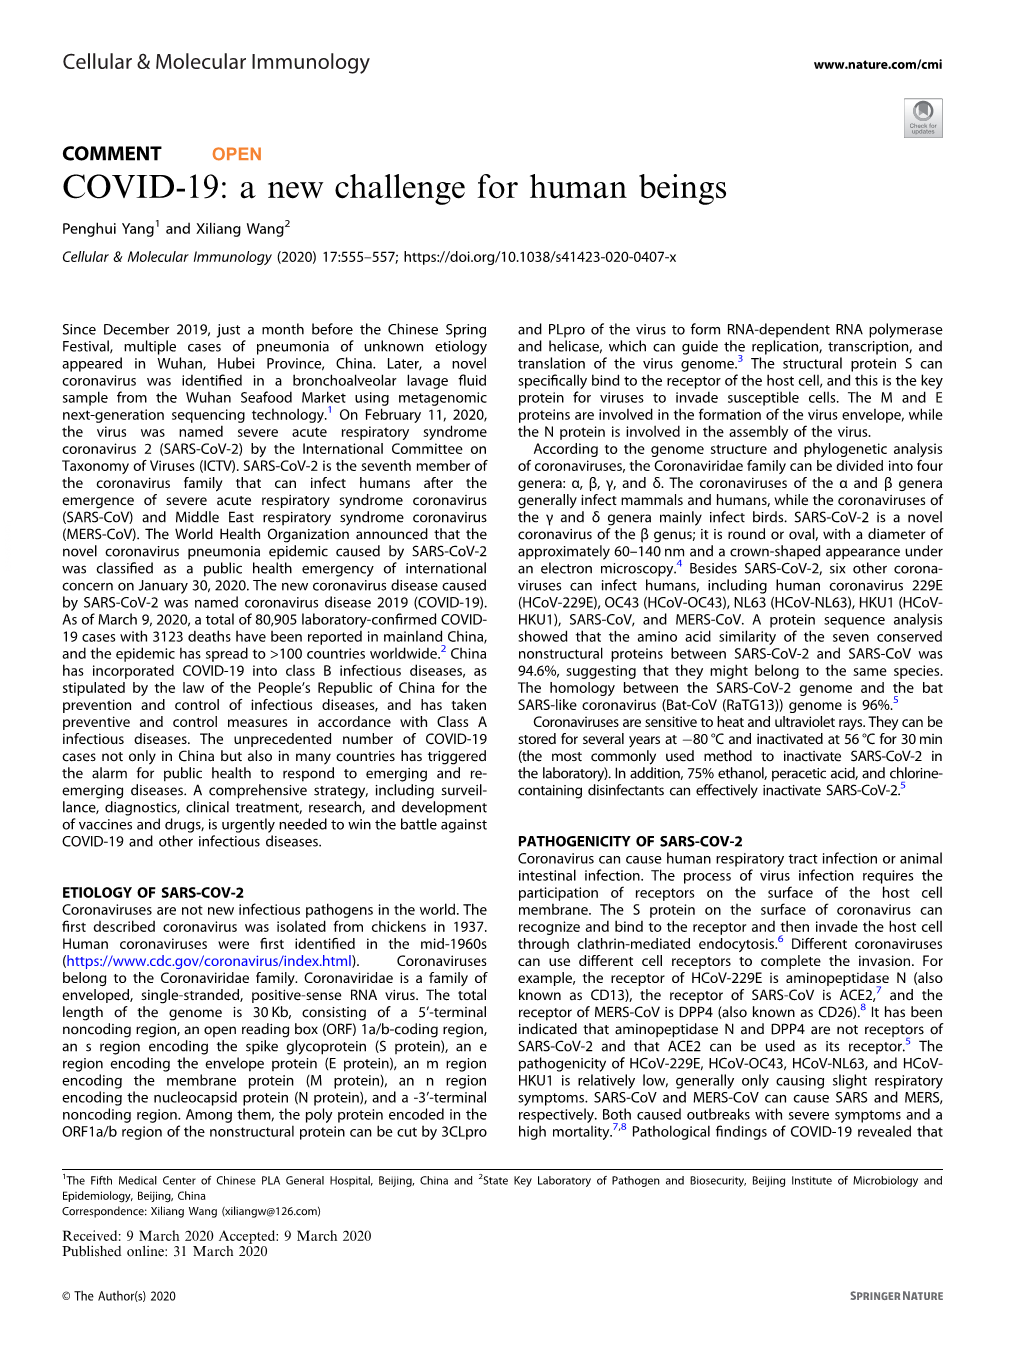 COVID-19: a New Challenge for Human Beings